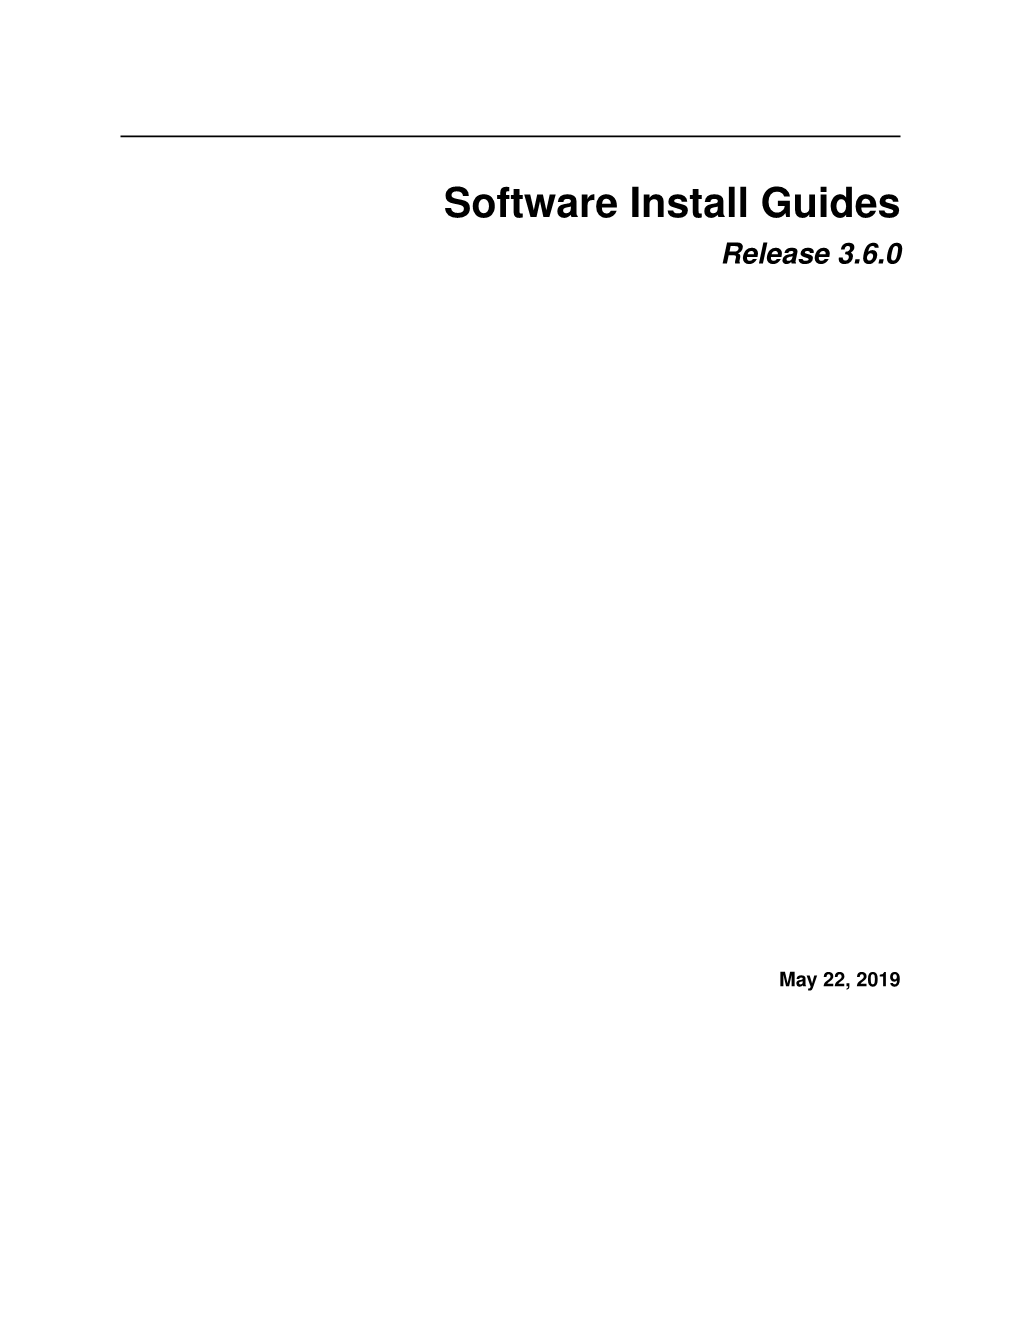 Software Install Guides Release 3.6.0